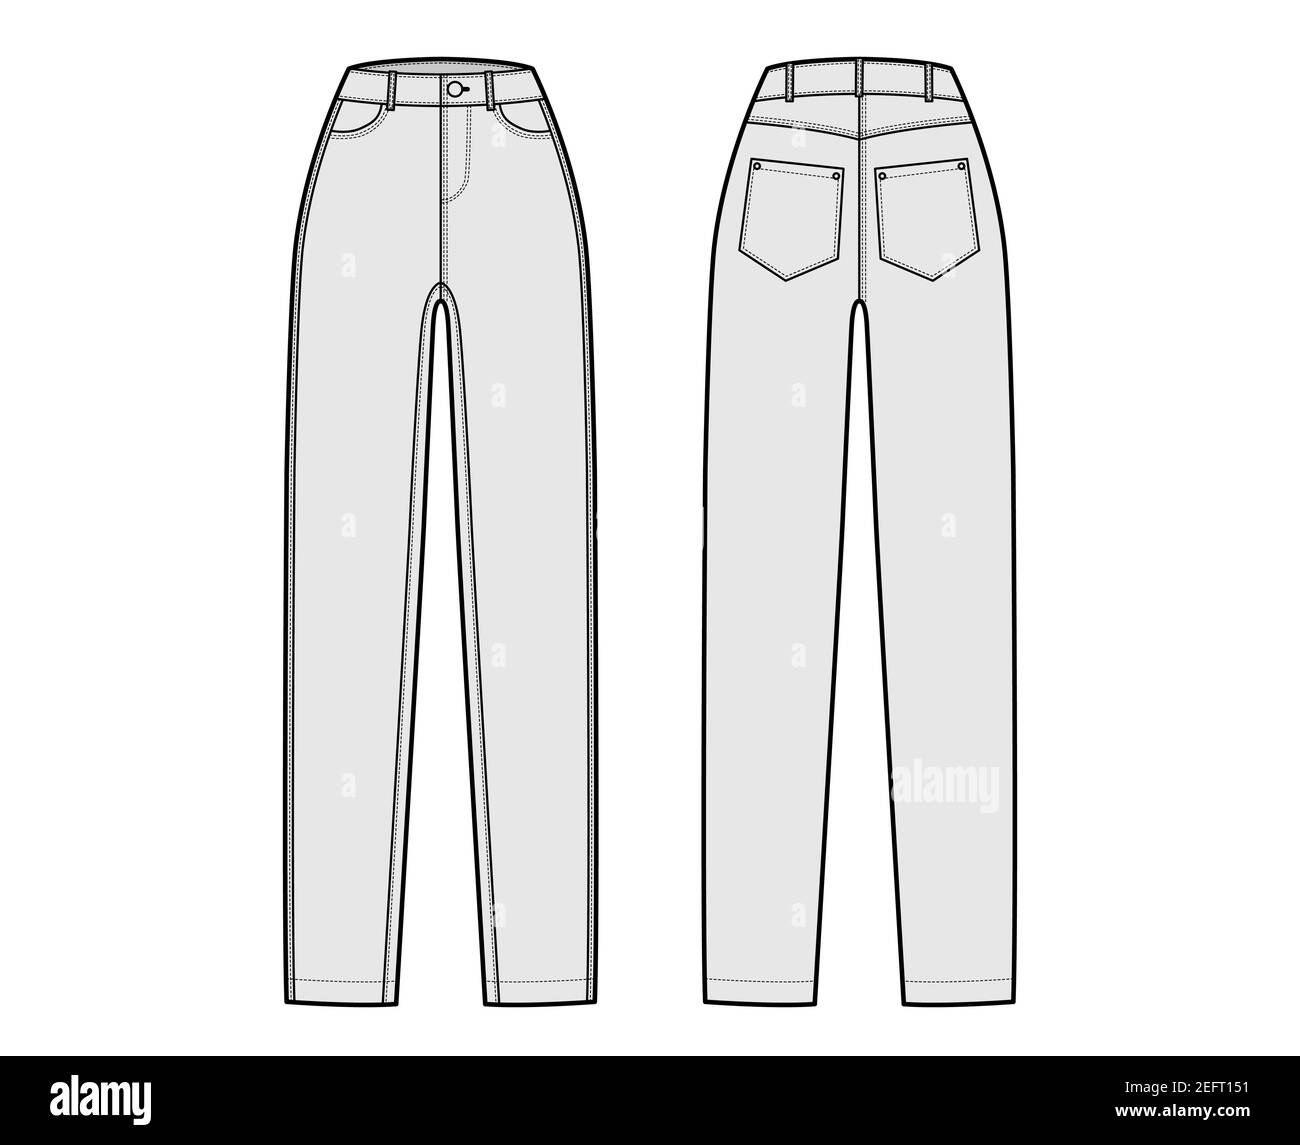 Skinny Jeans Denim pants technical fashion illustration with full length,  normal waist, high rise, coin, 5